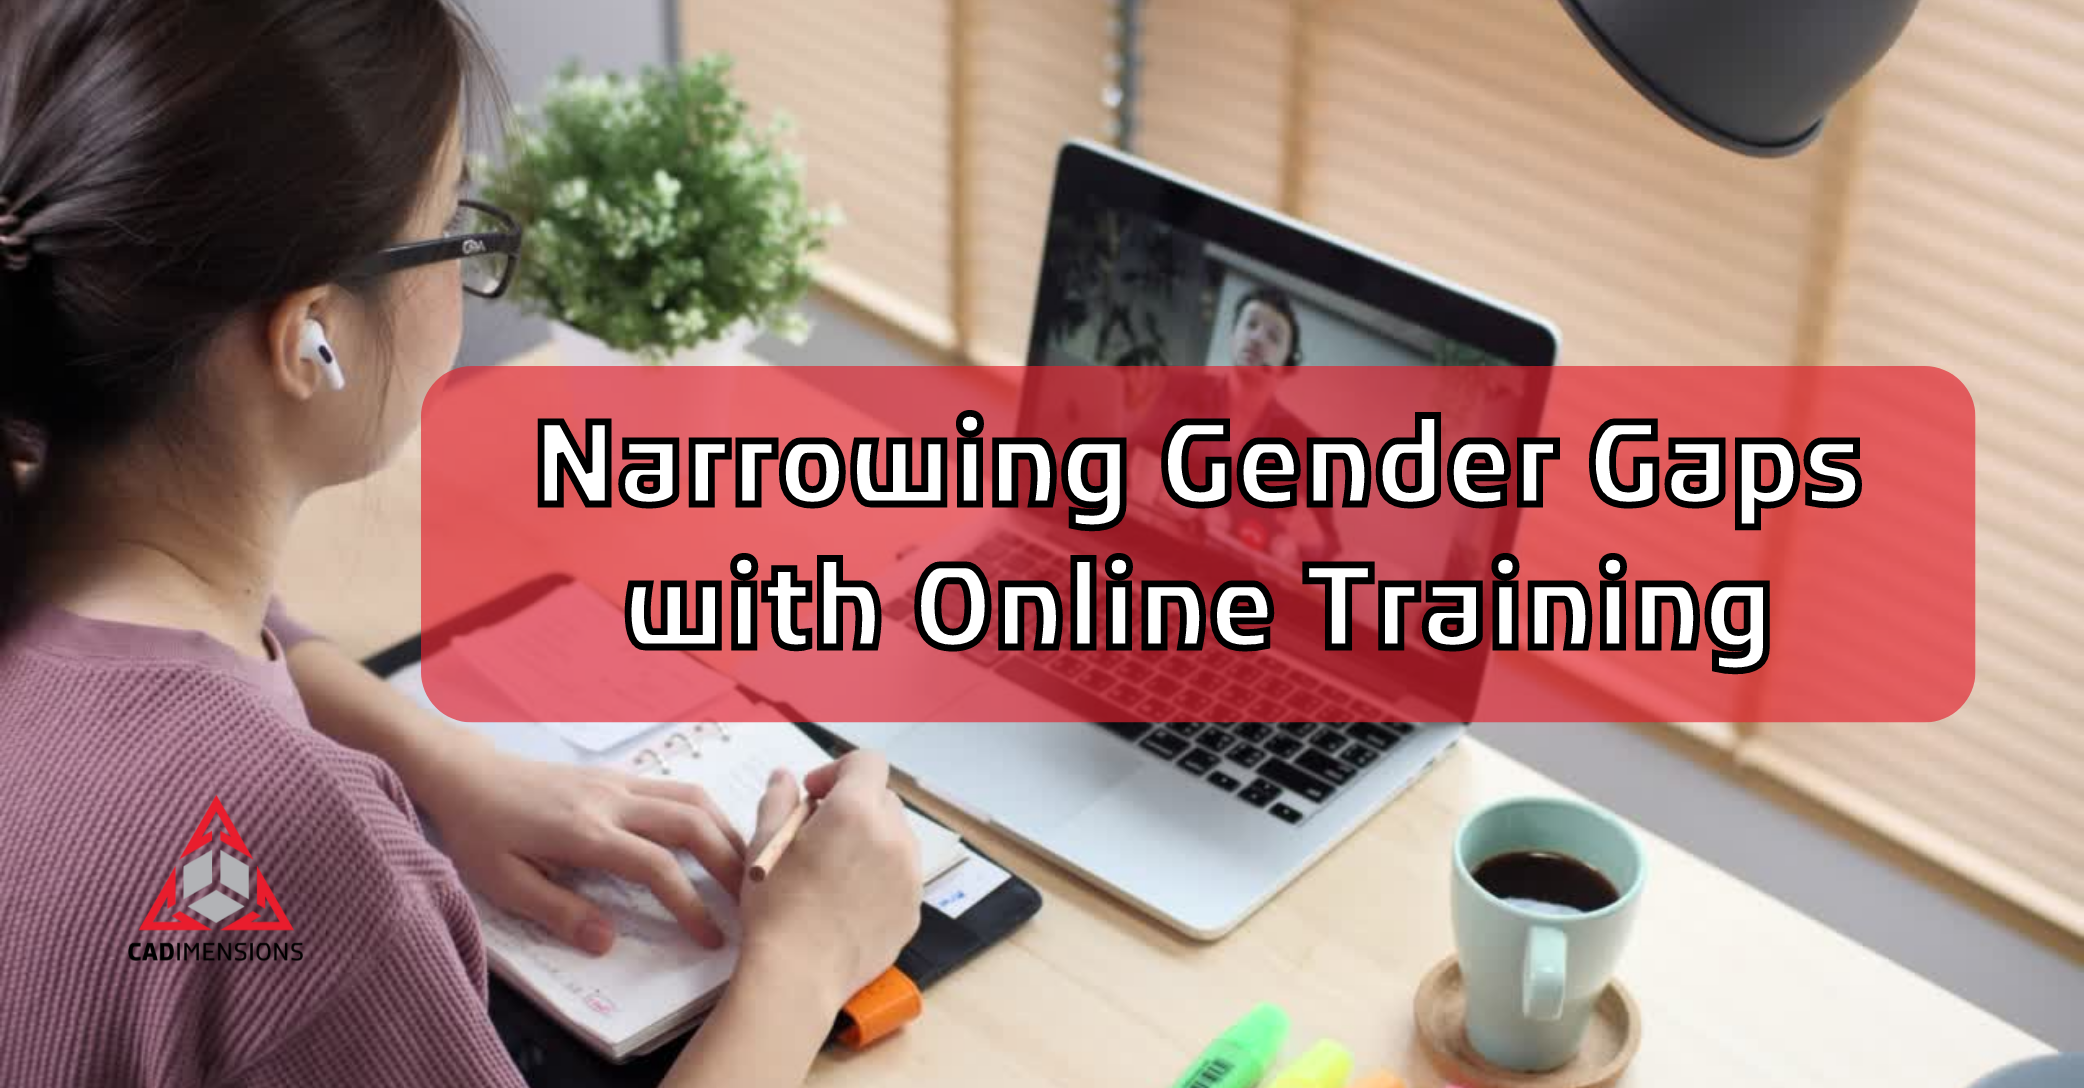 How Student Online Learning Helps Narrow the Higher Education and Workforce Gender Gap